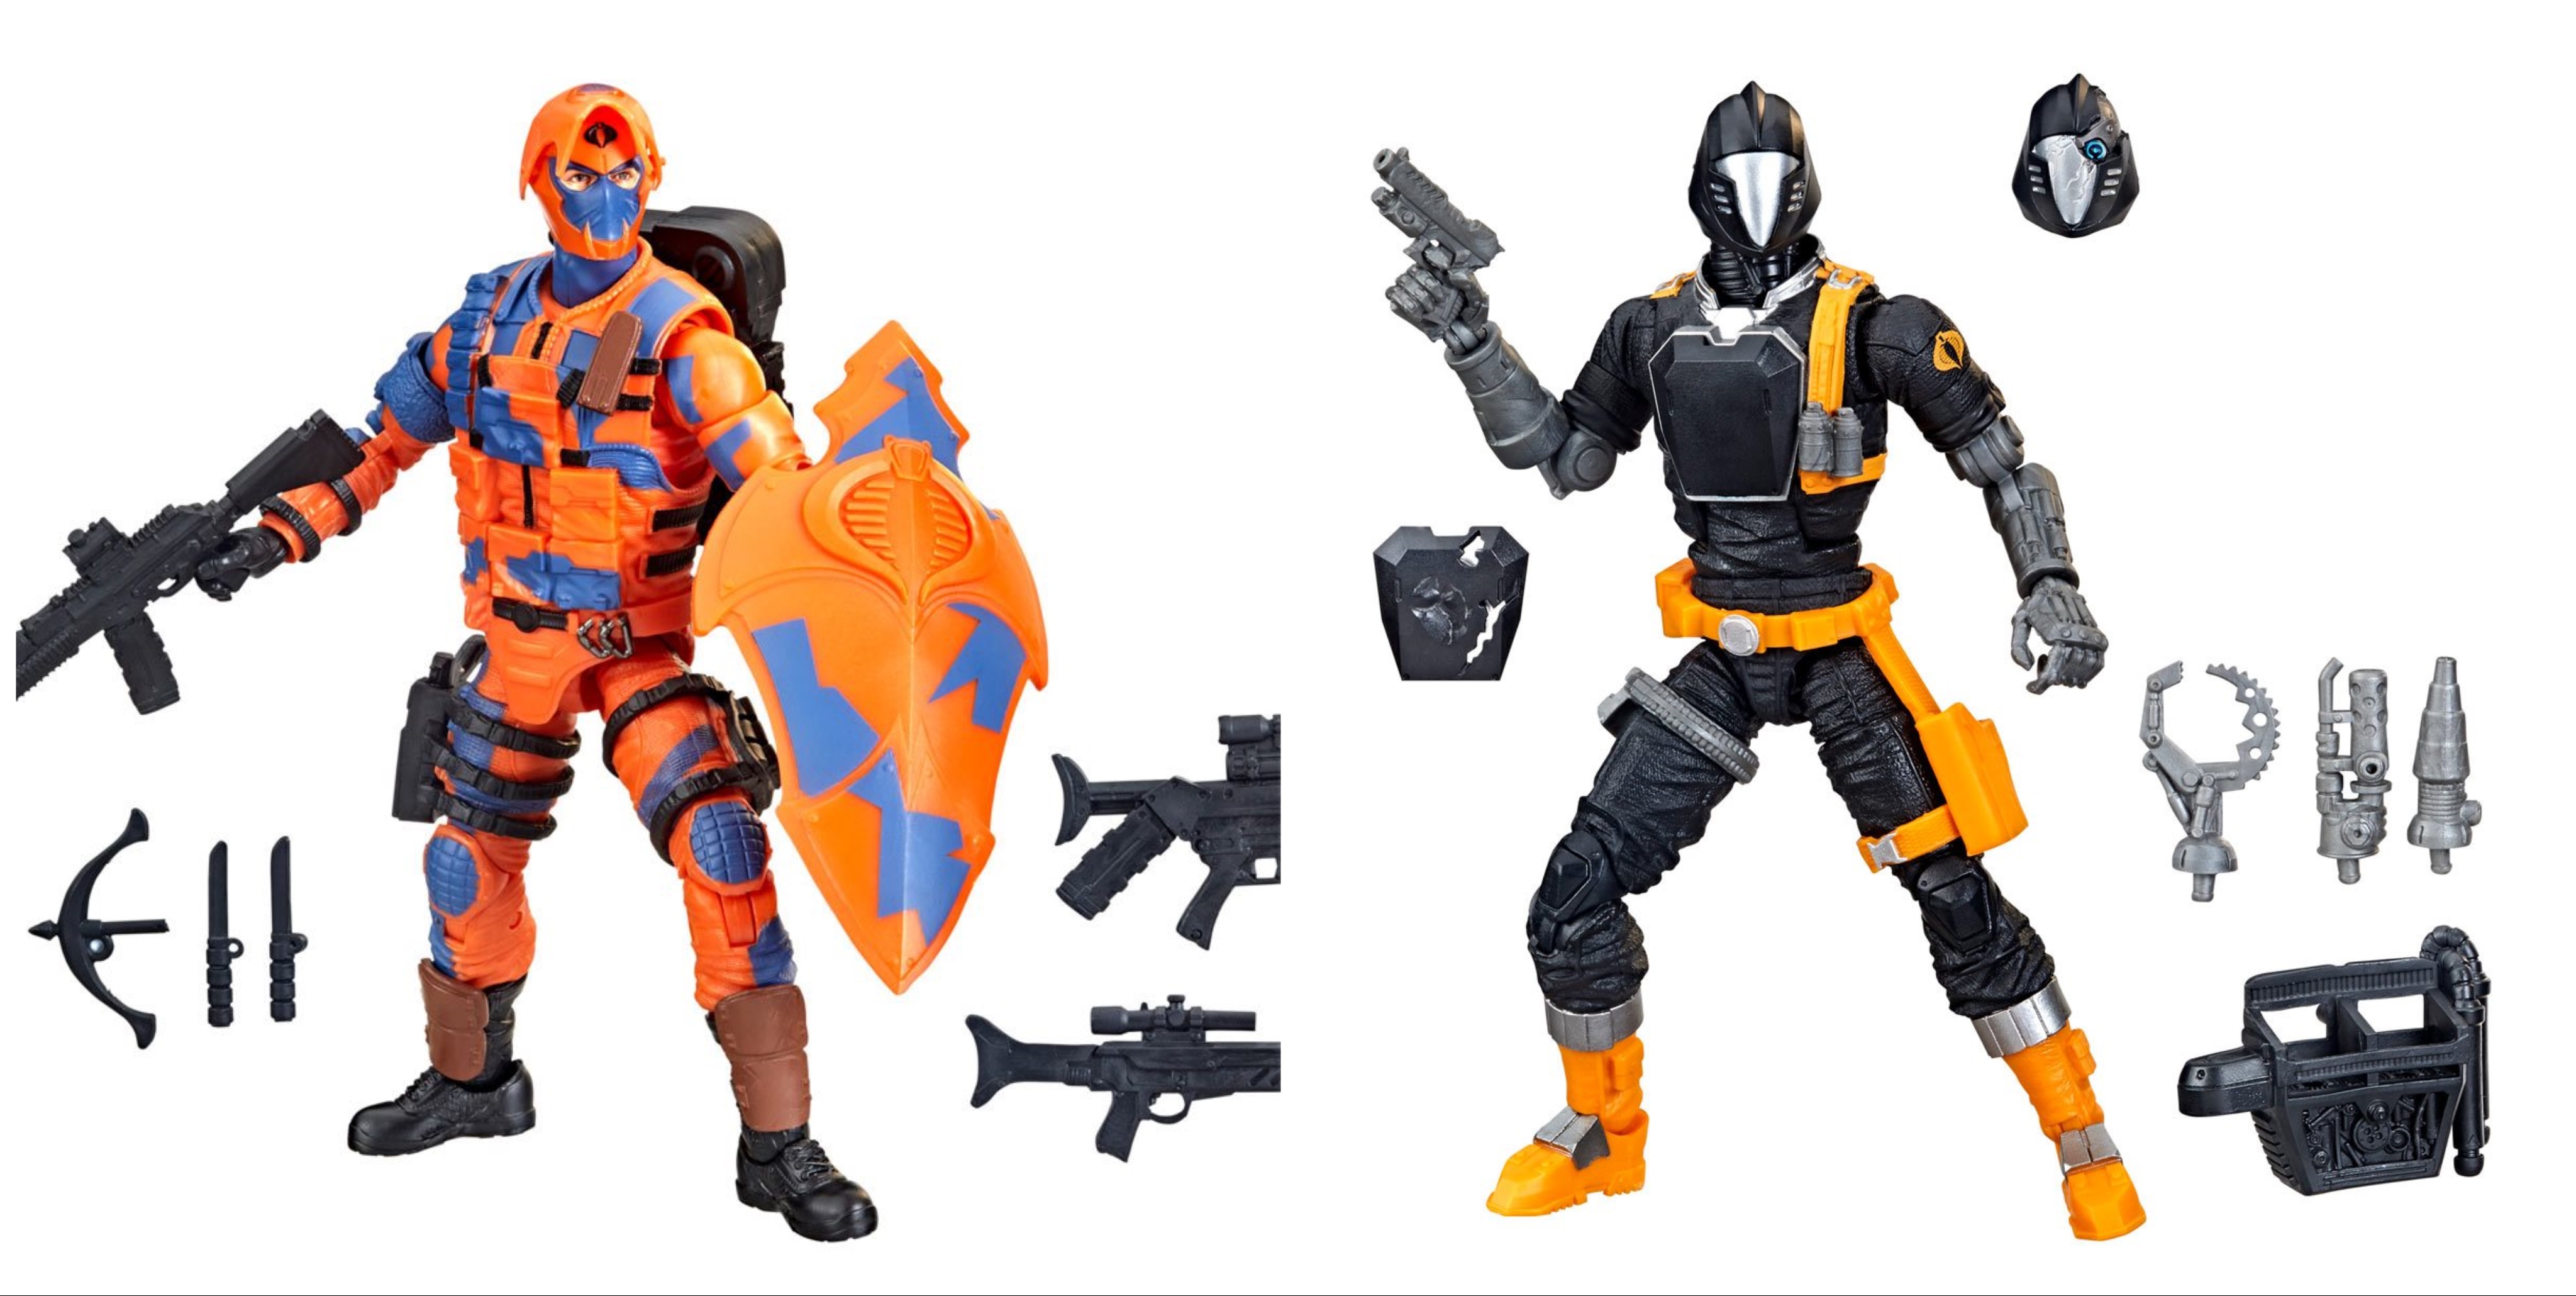 G.I. Joe Classified Series Cobra B.A.T. and Alley Viper In-Stock at Amazon